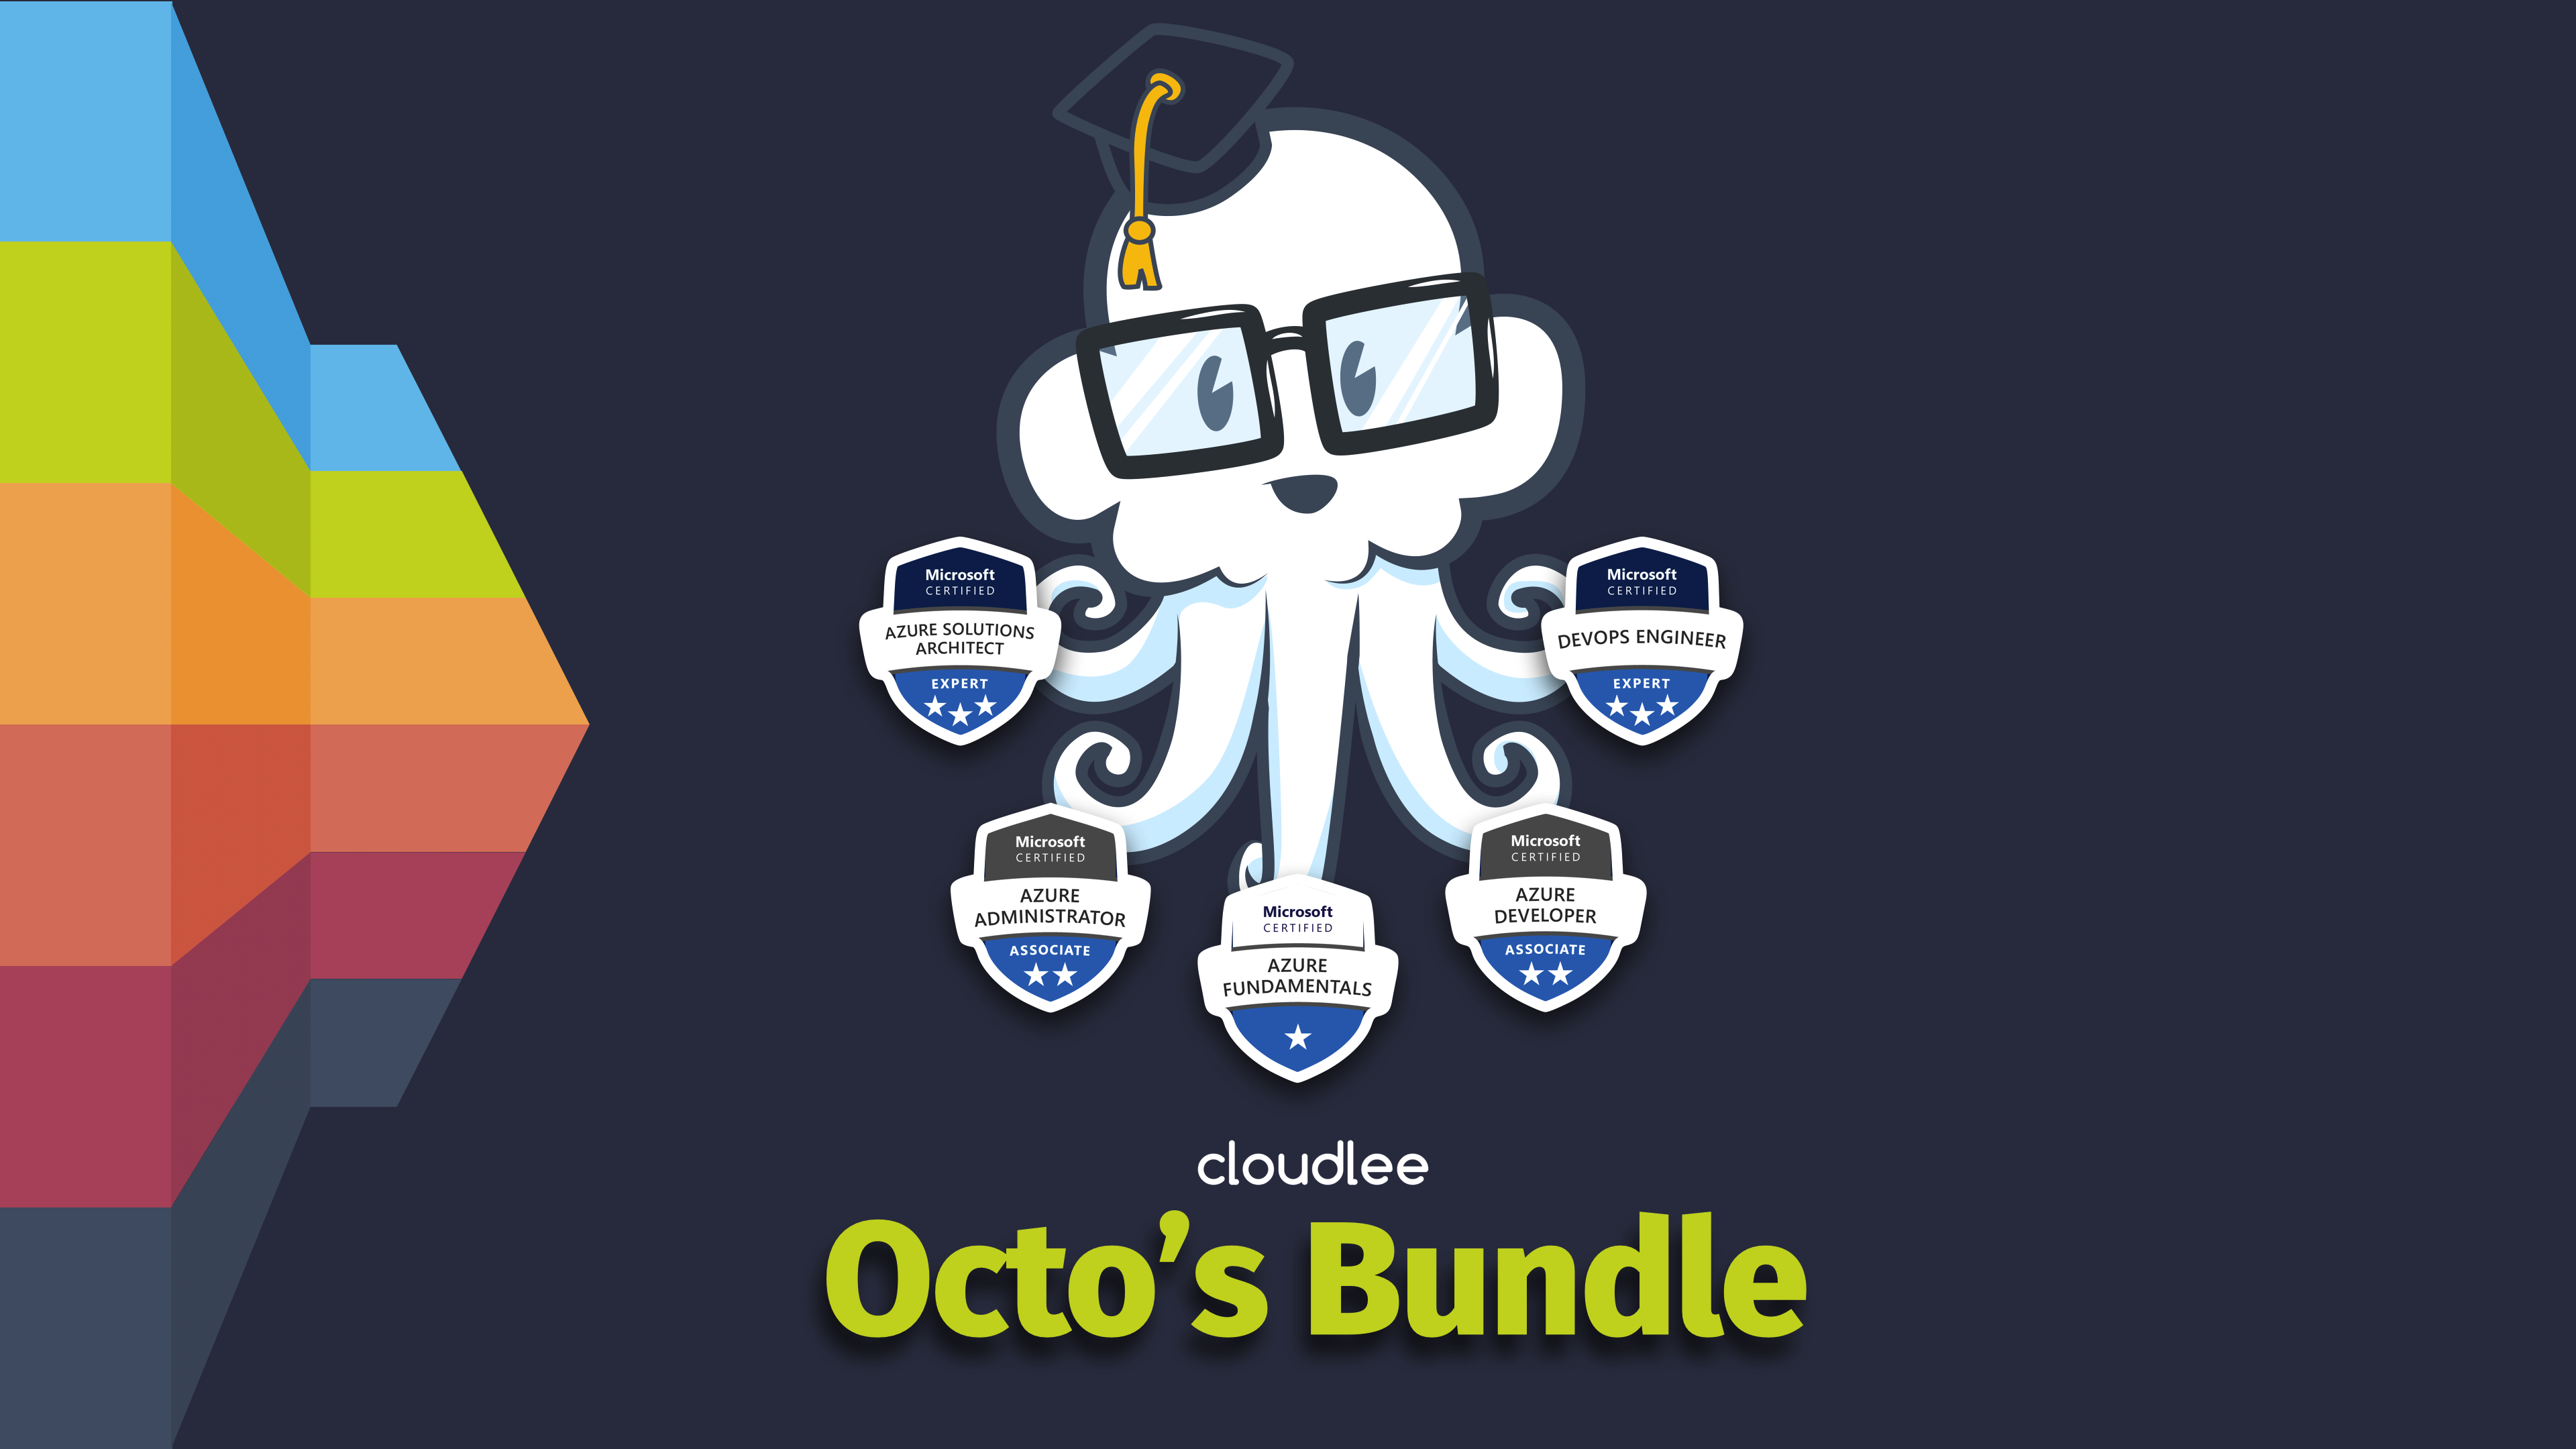 Octo's Bundle - All the Azure Things